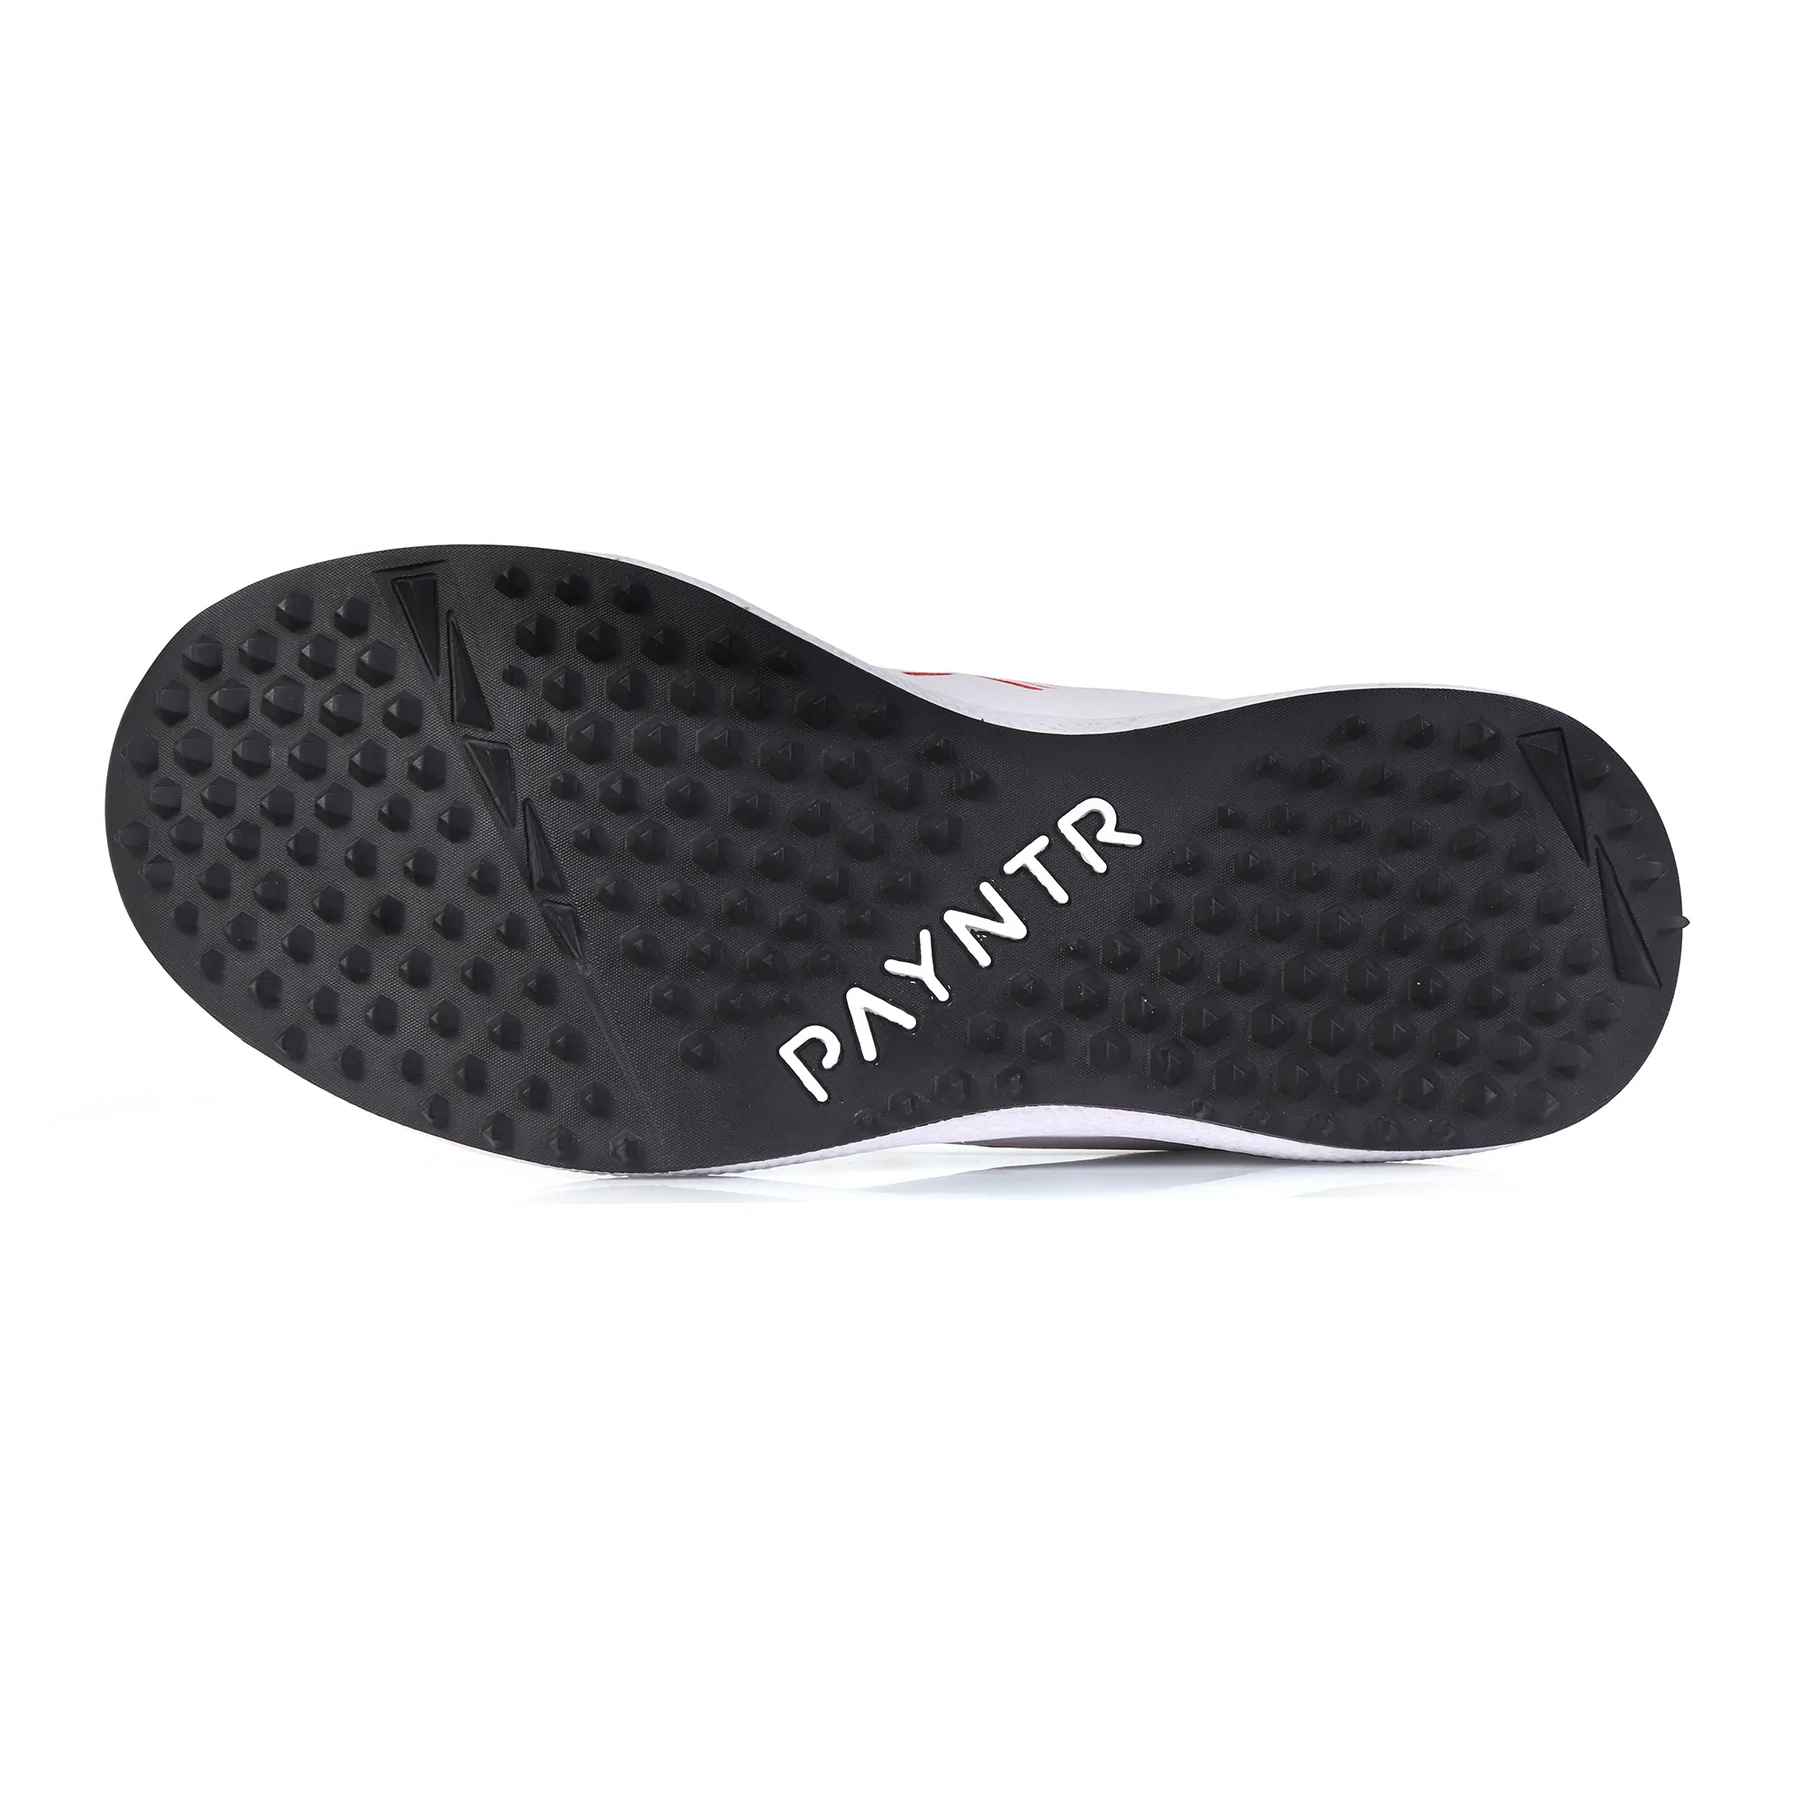 PAYNTR X RUBBER Cricket Shoes – White/Black/Red